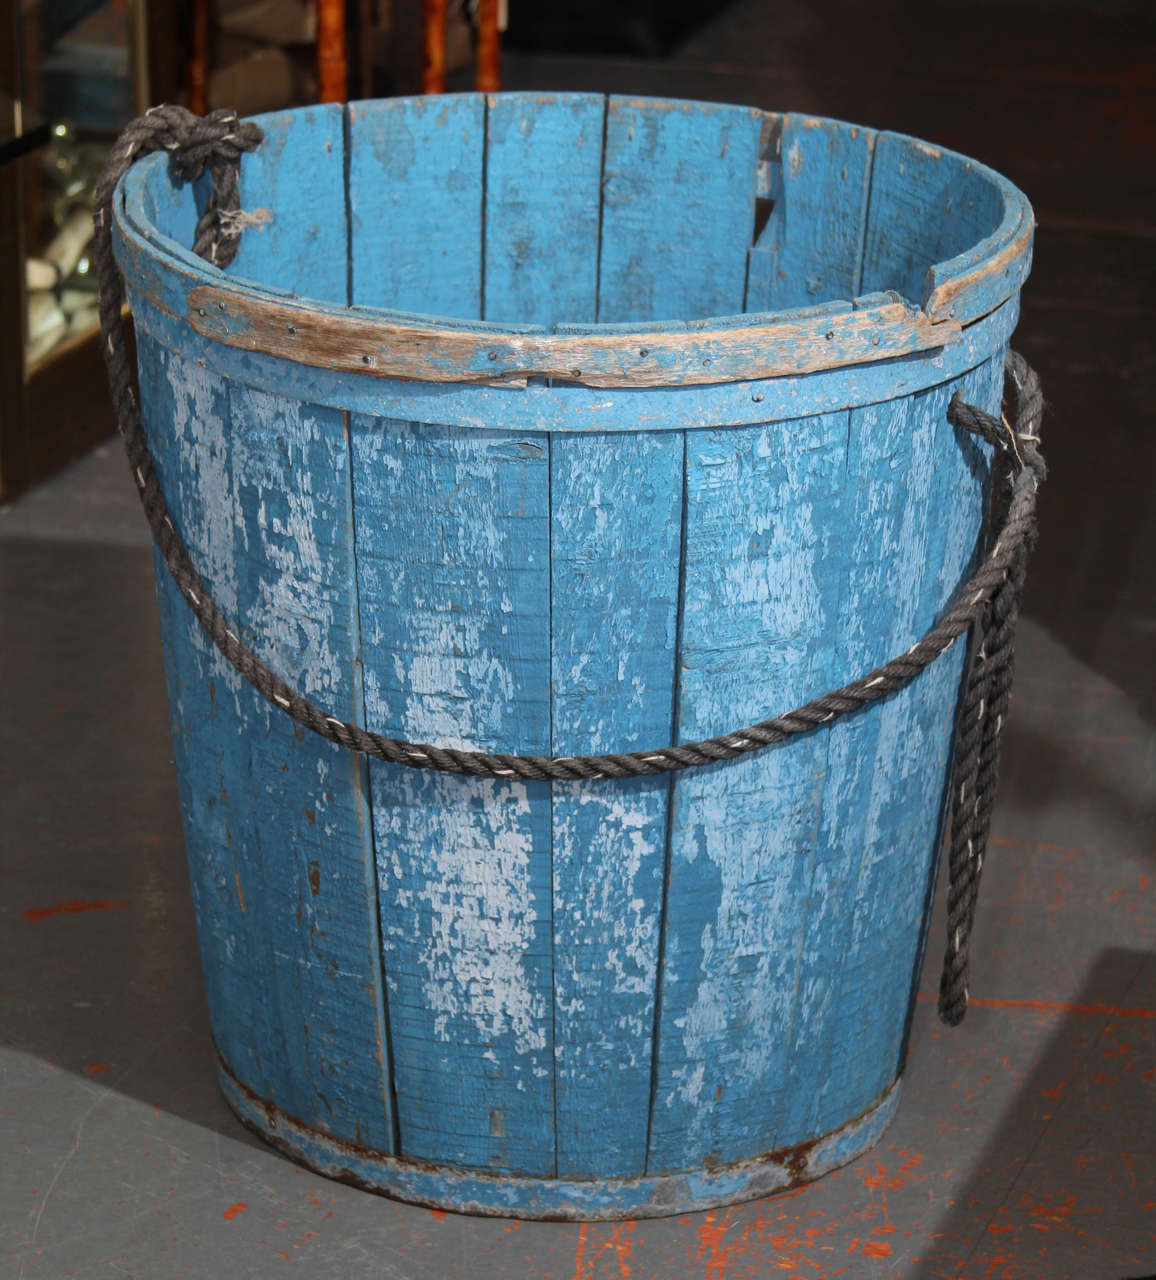 Great old blue paint on large container of wood with metal banding. Would be perfect poolside to hold towels or lemon tree - or indoors as a lovely object /for firewood /or as a catch- all.